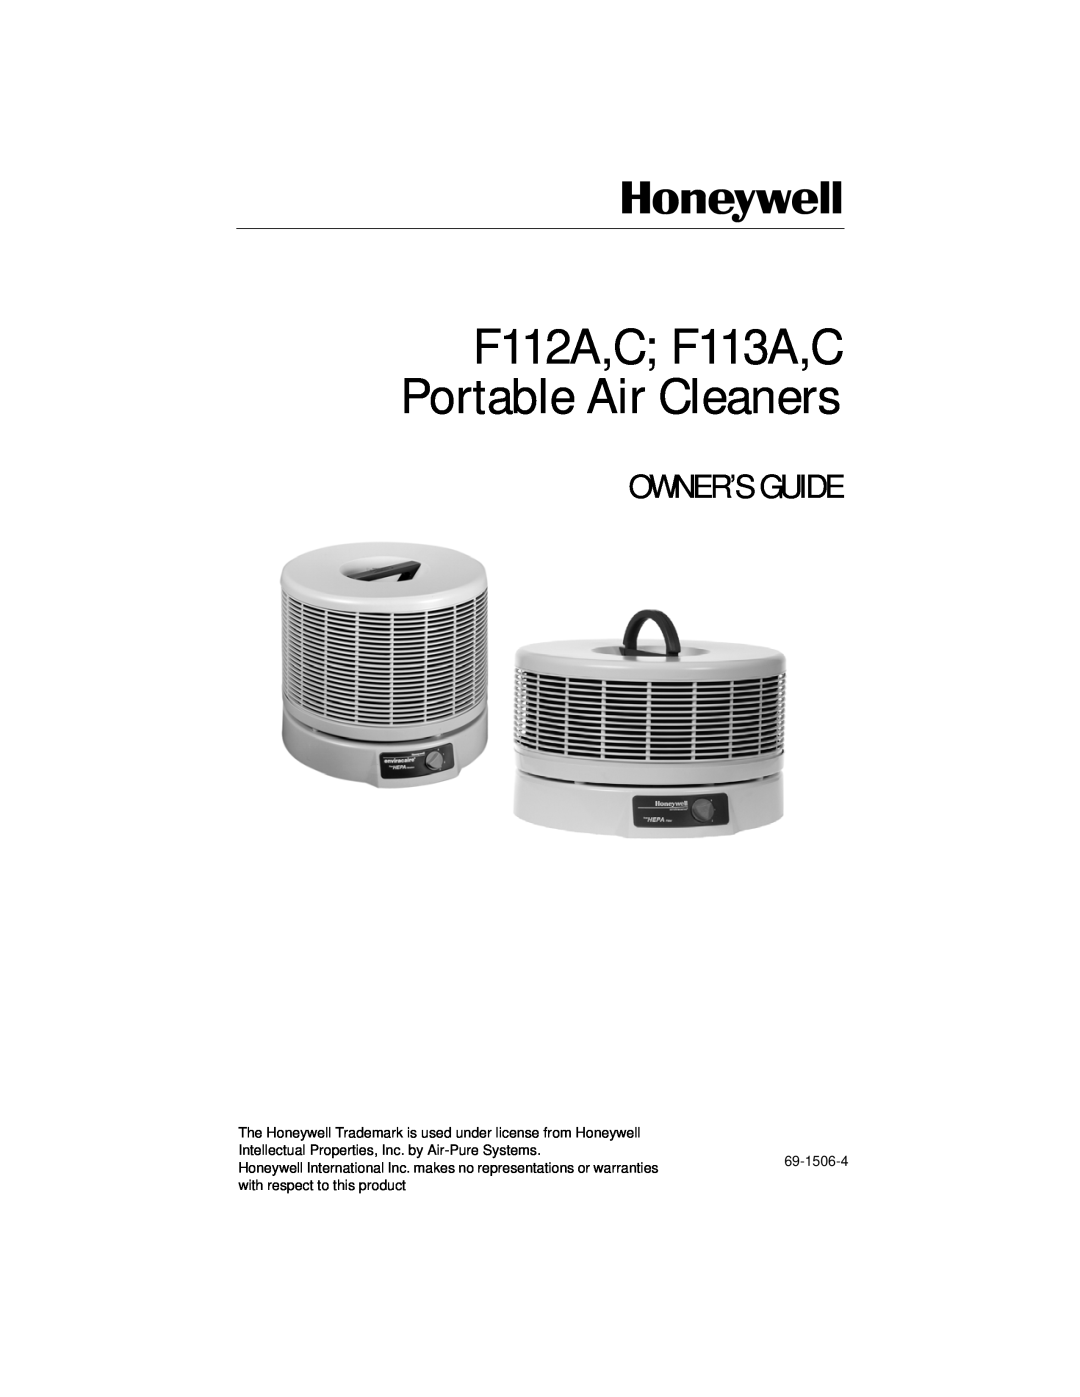 Honeywell F113C, F112C manual F112A,C F113A,C Portable Air Cleaners, Owner’S Guide 